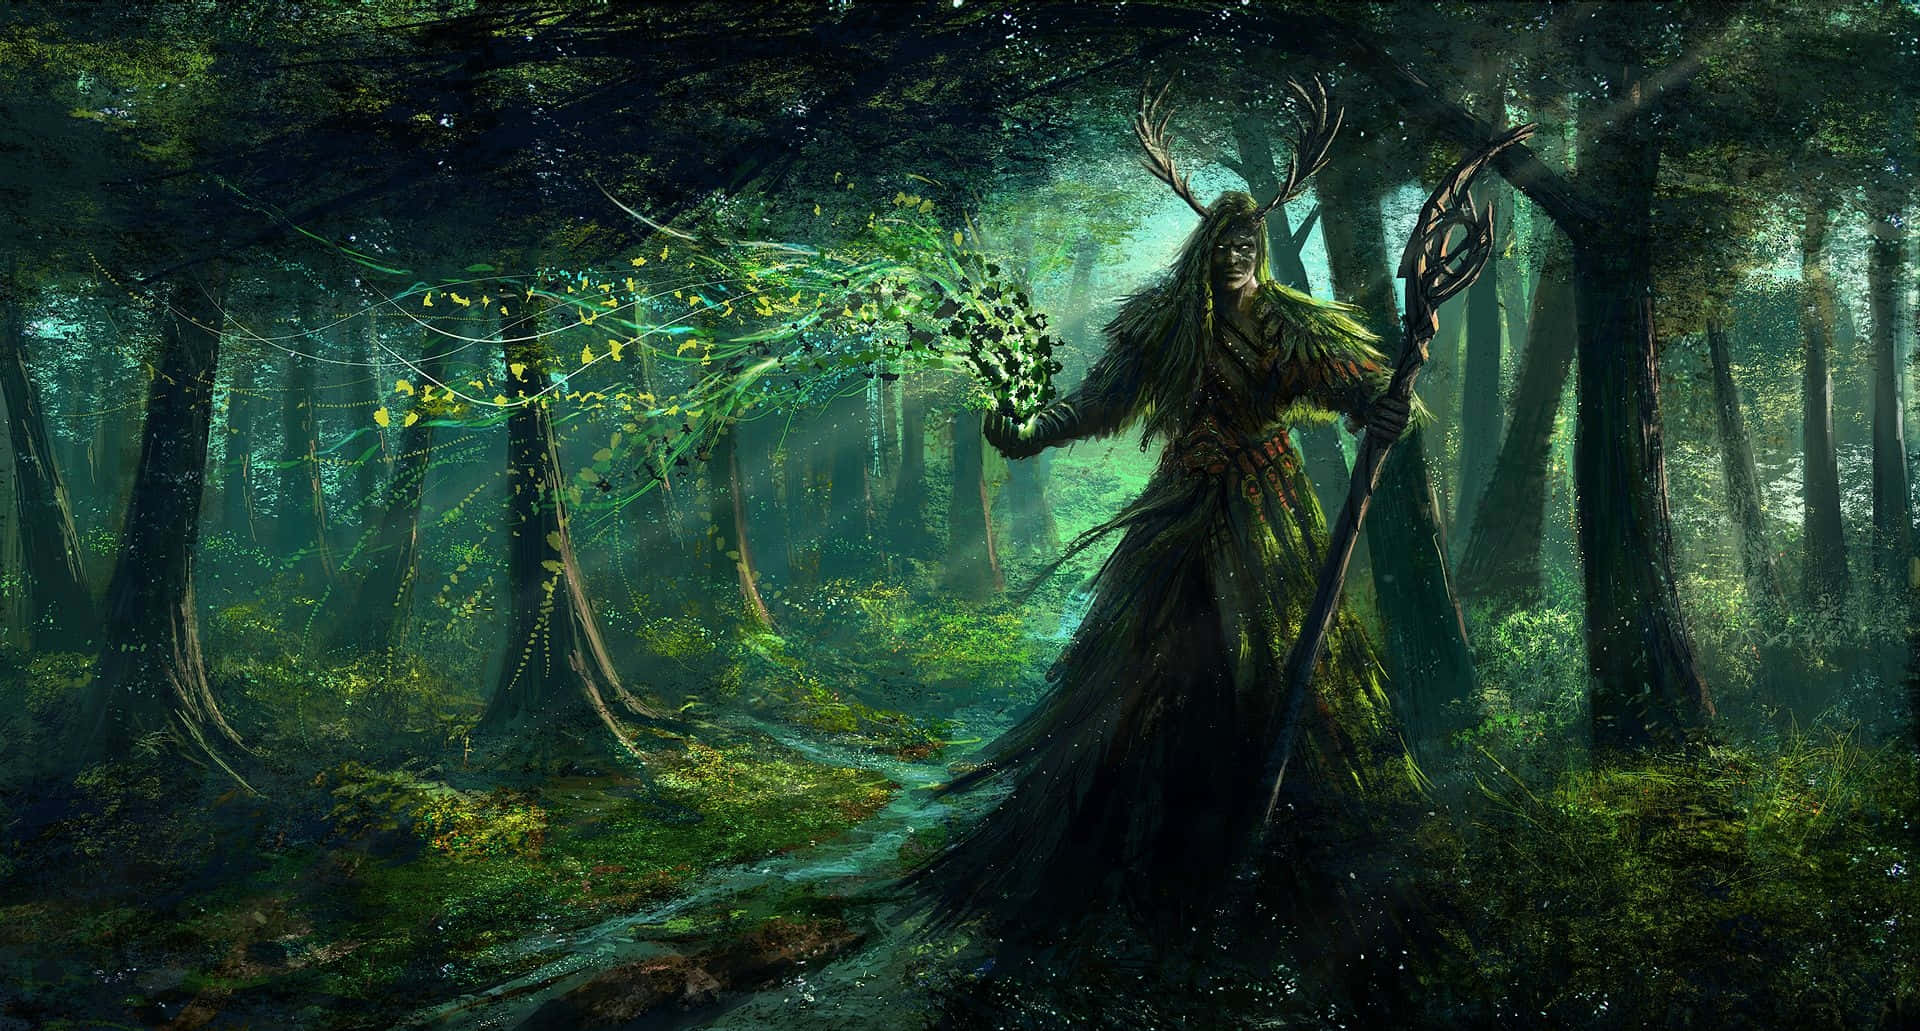 Mysterious Dark Wizard summoning powerful magic in an enchanted forest Wallpaper